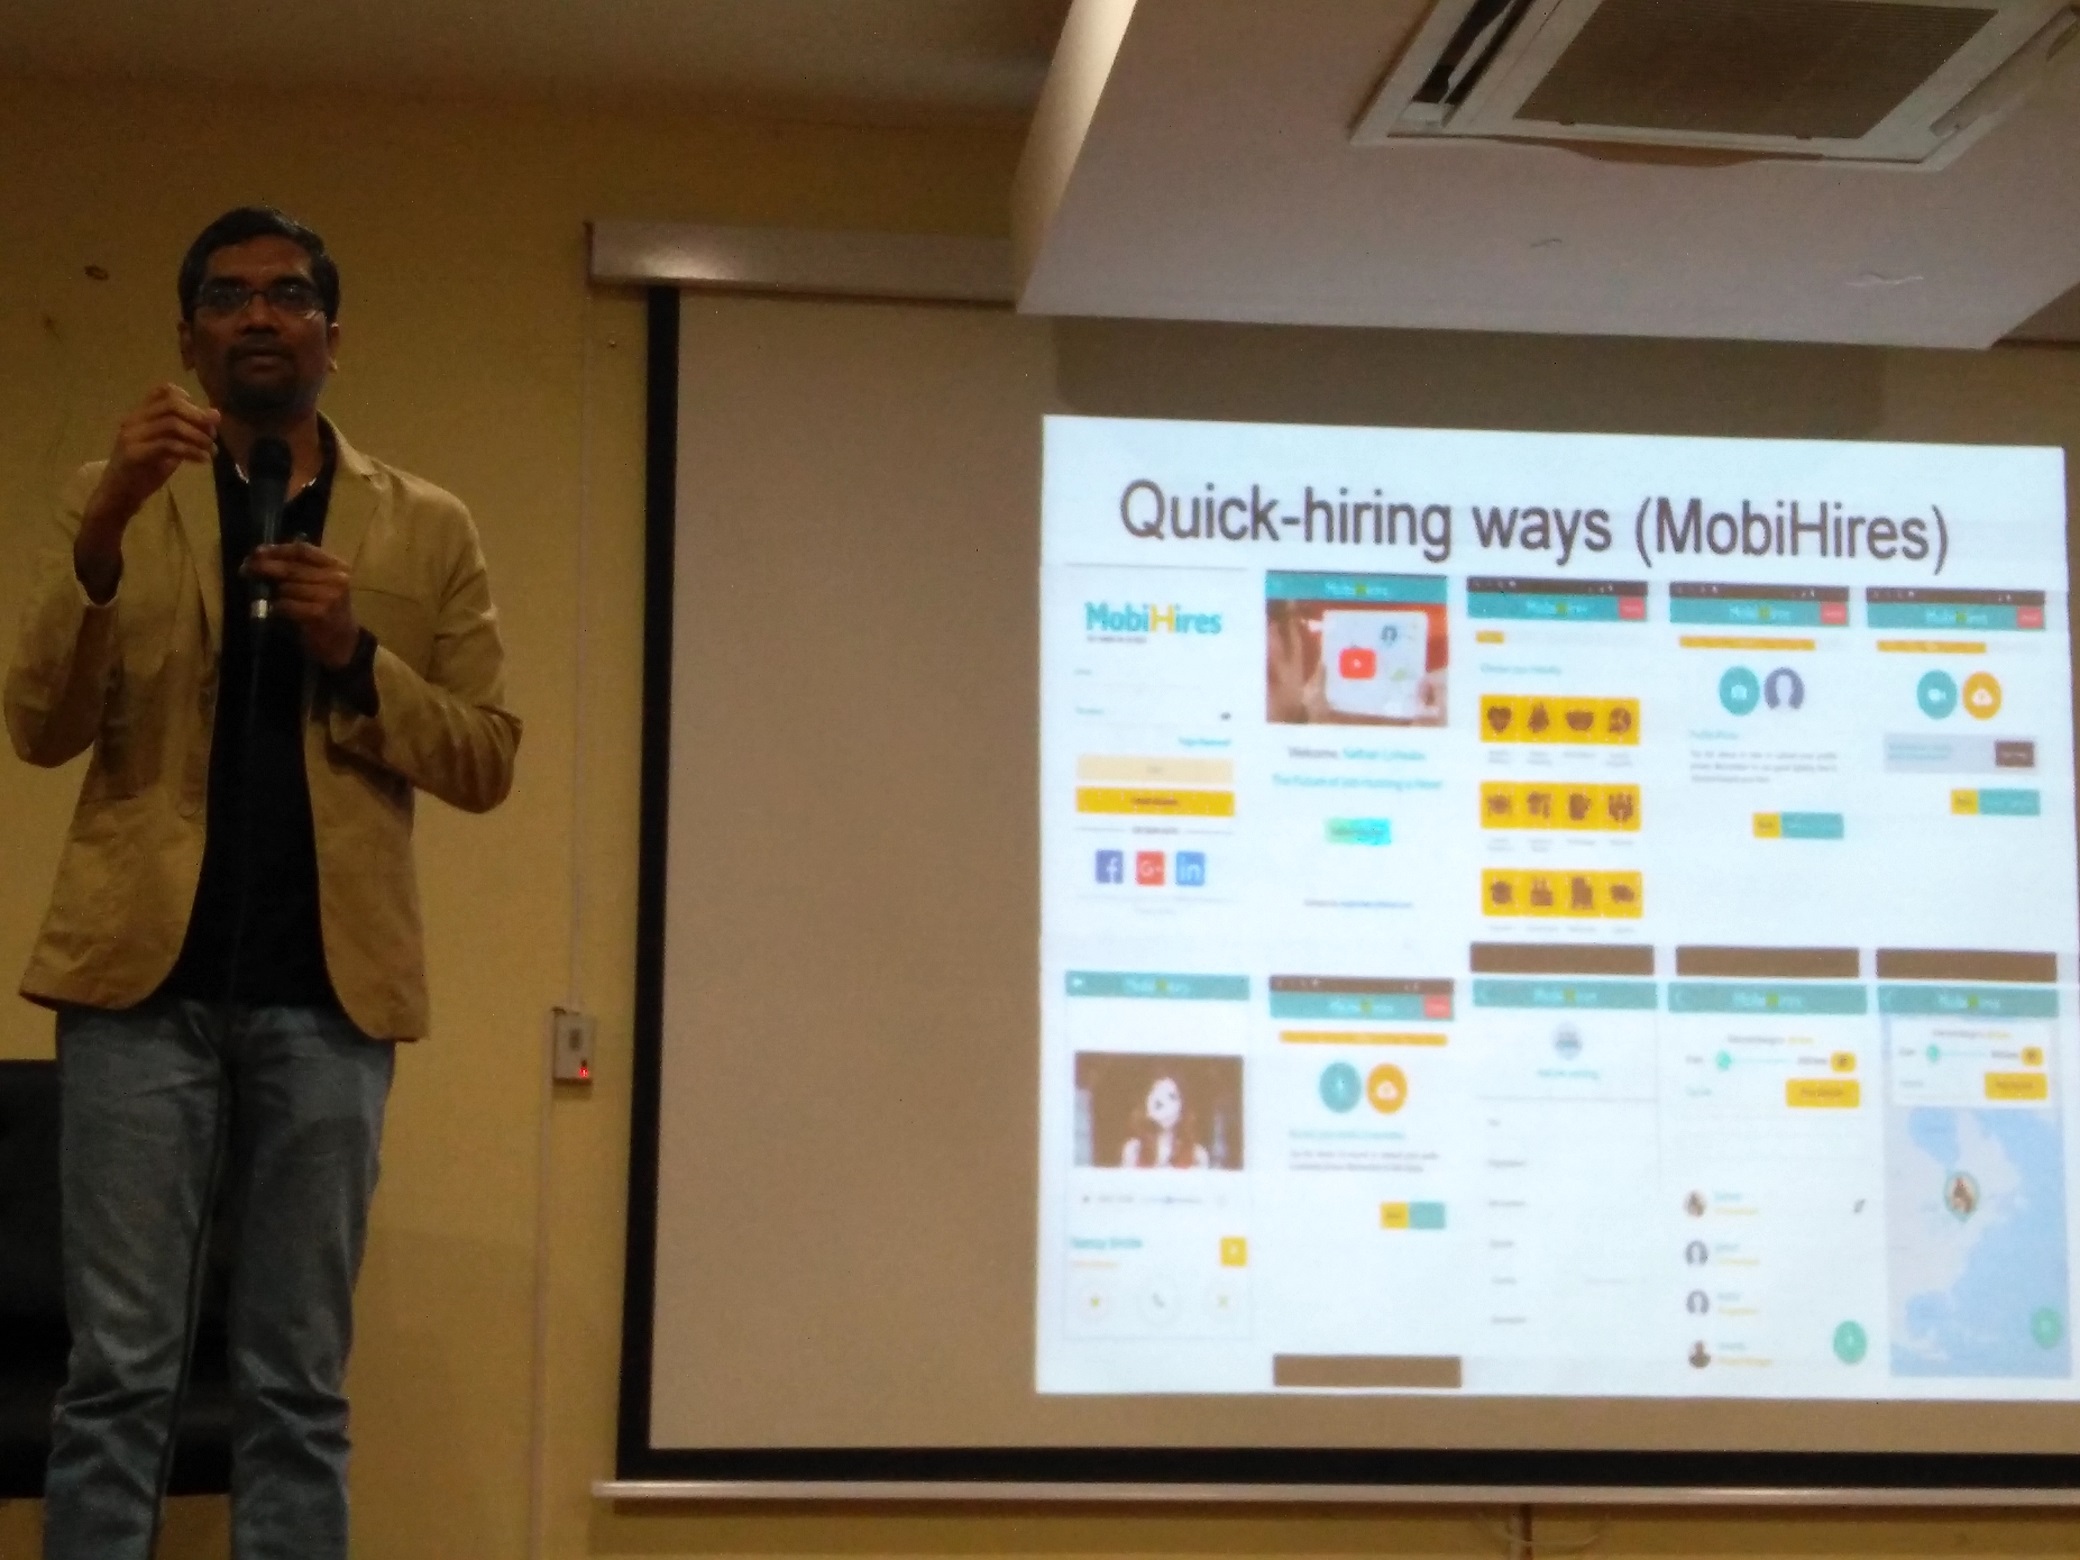 Ananth Sivagnanam enlightening audience on Video based Hiring tools, like MobiHires which is a Next Generation Mobile Solution